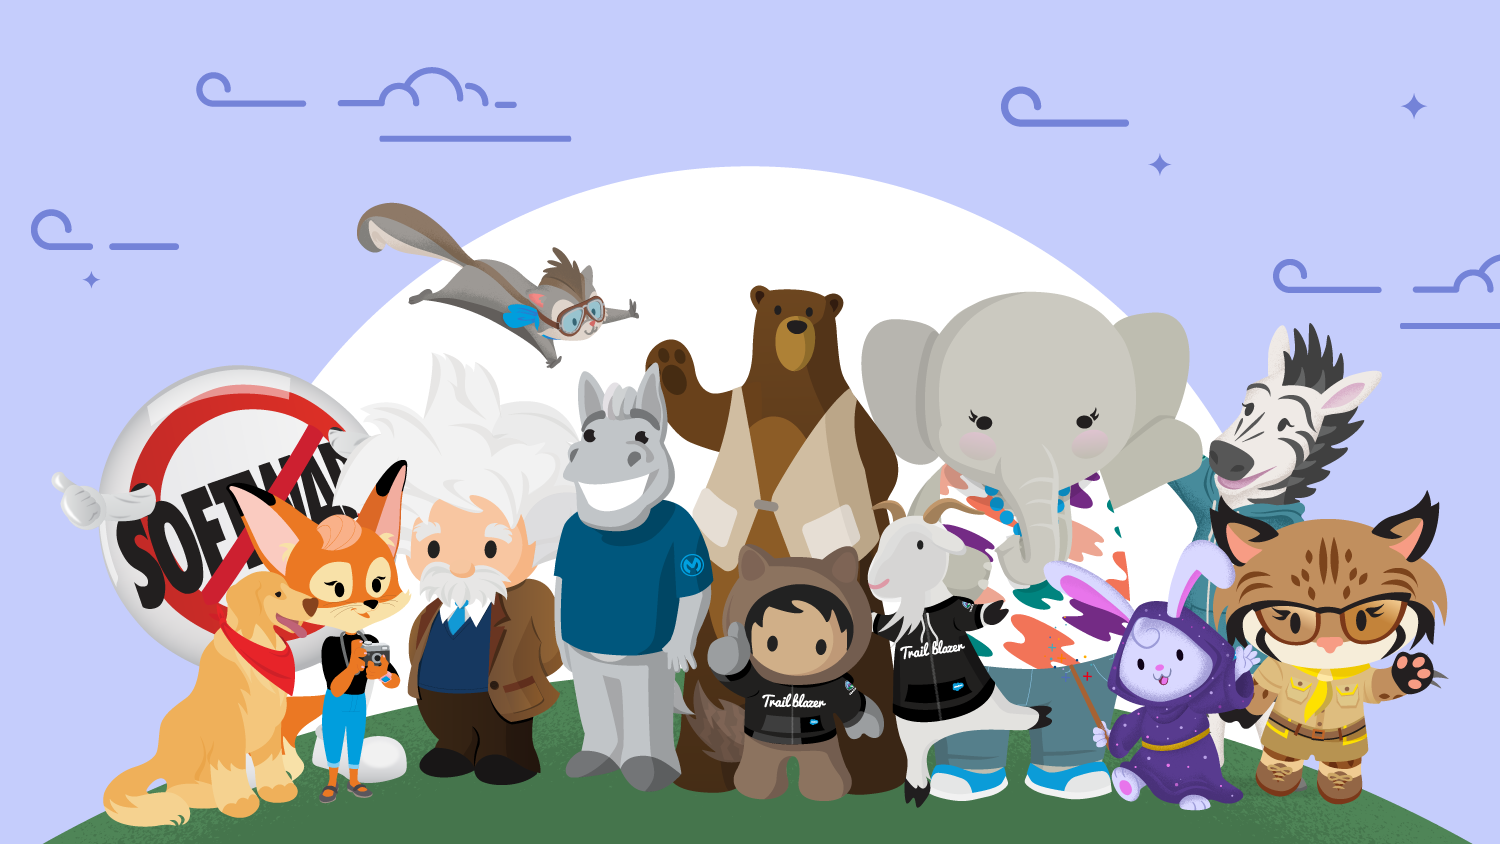 Who Are the Salesforce Characters? Get to Know Astro and Friends